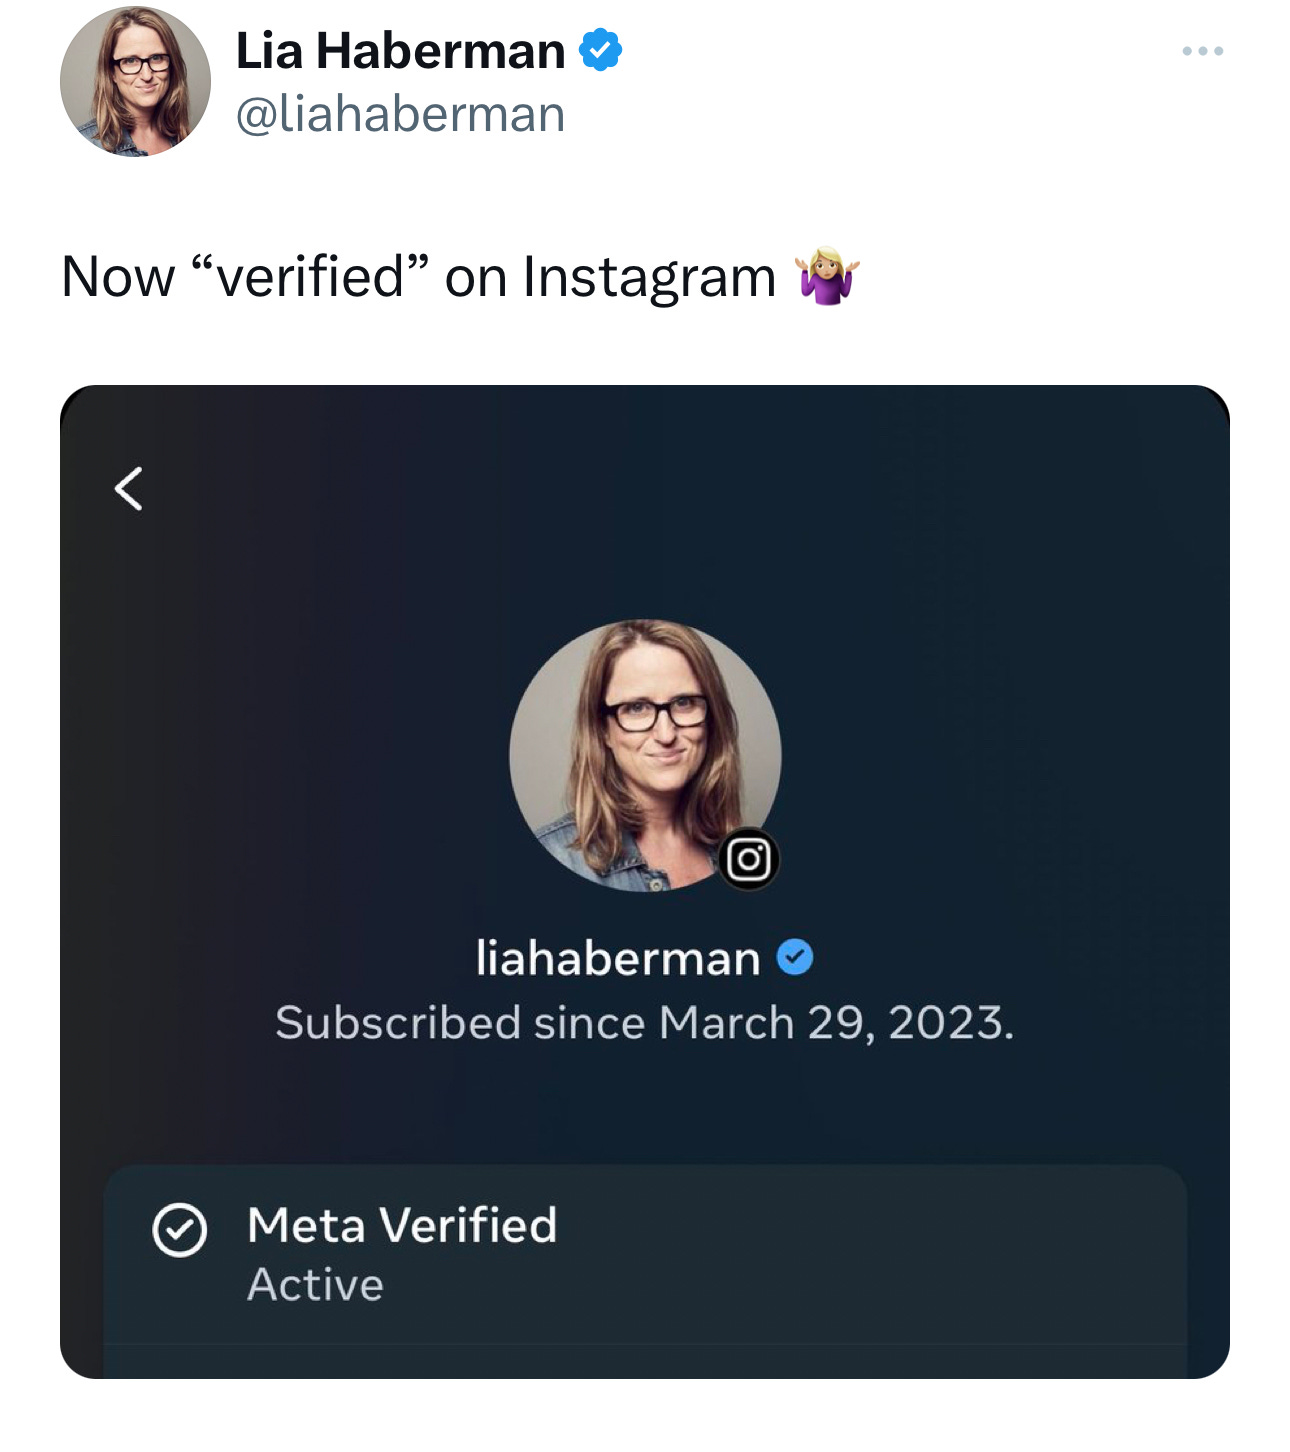 A tweet about qualifying for Meta Verified's subscription program: Now verified on Instagram